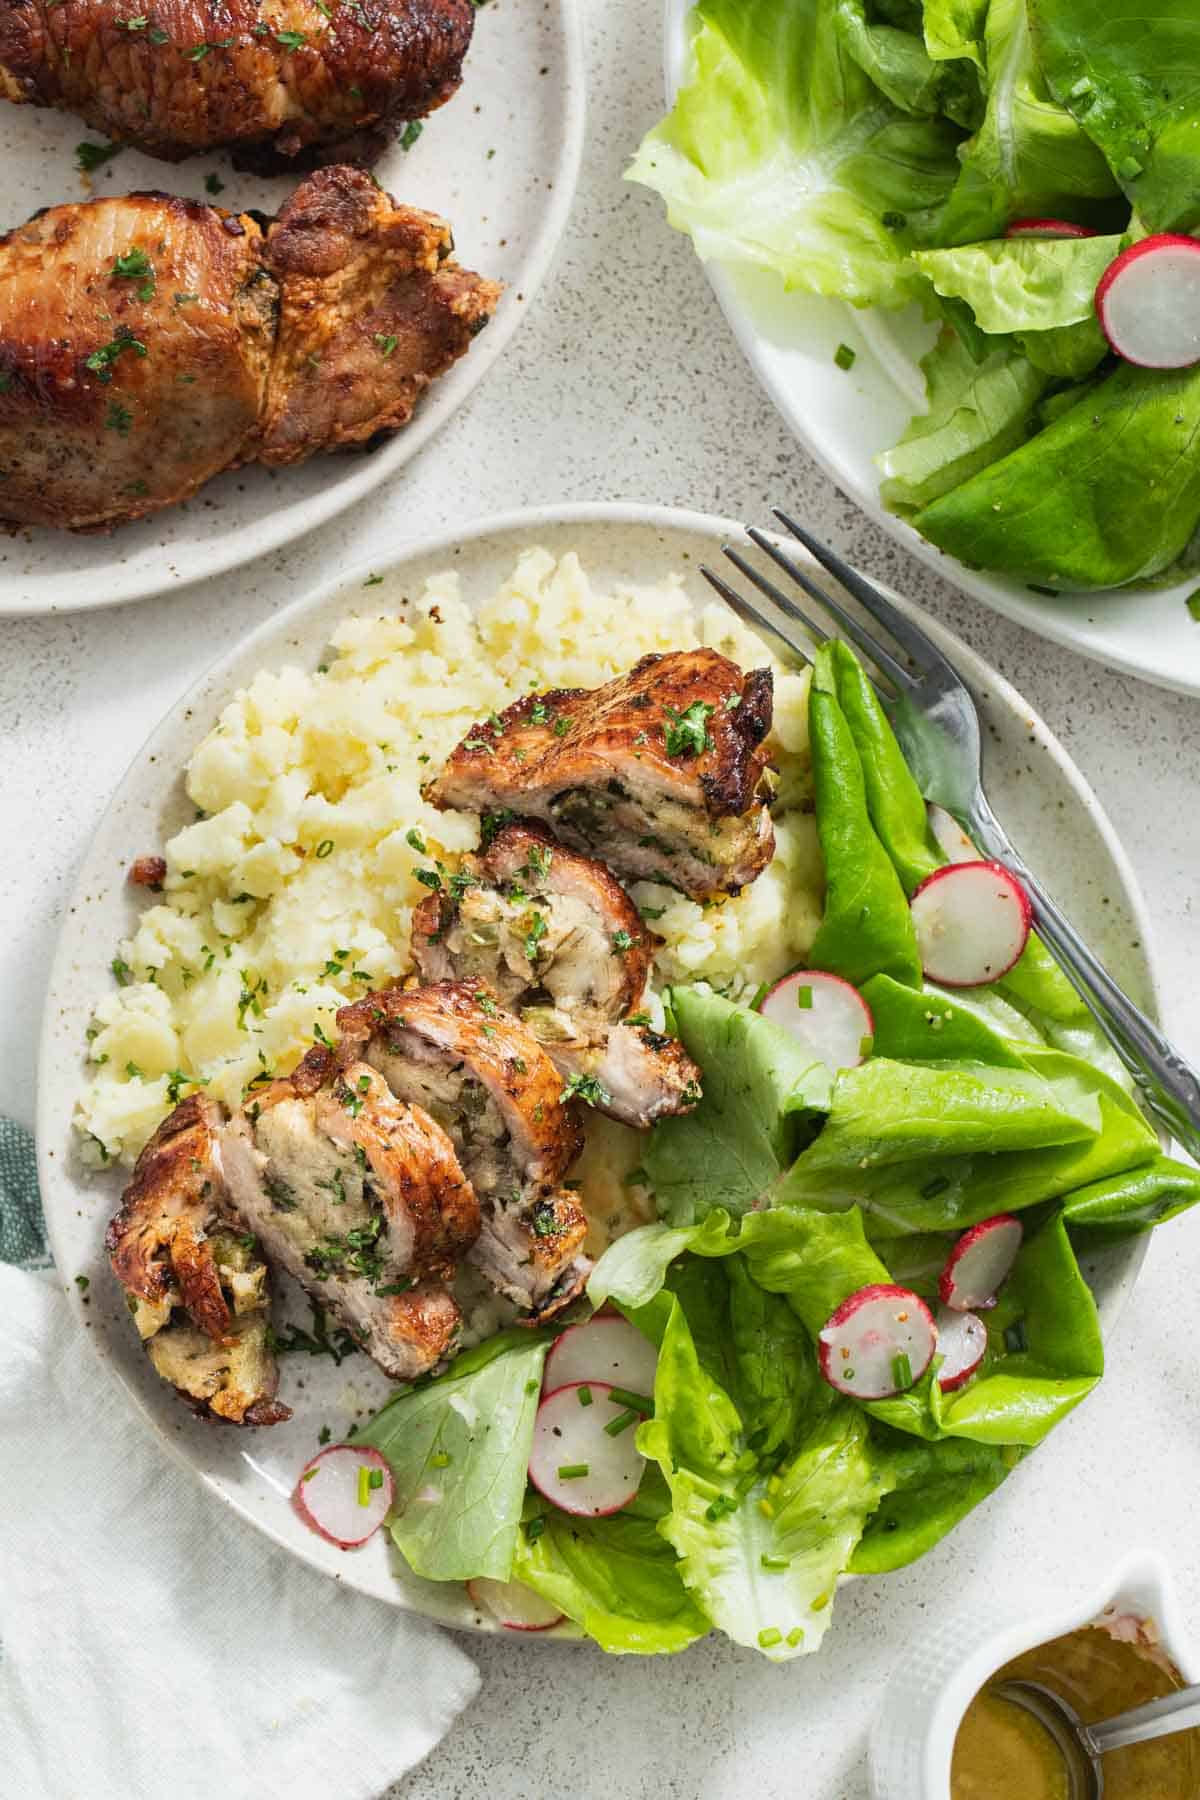 Stuffed pork chops sliced on a plate on top of mashed potatoes and a green salad.